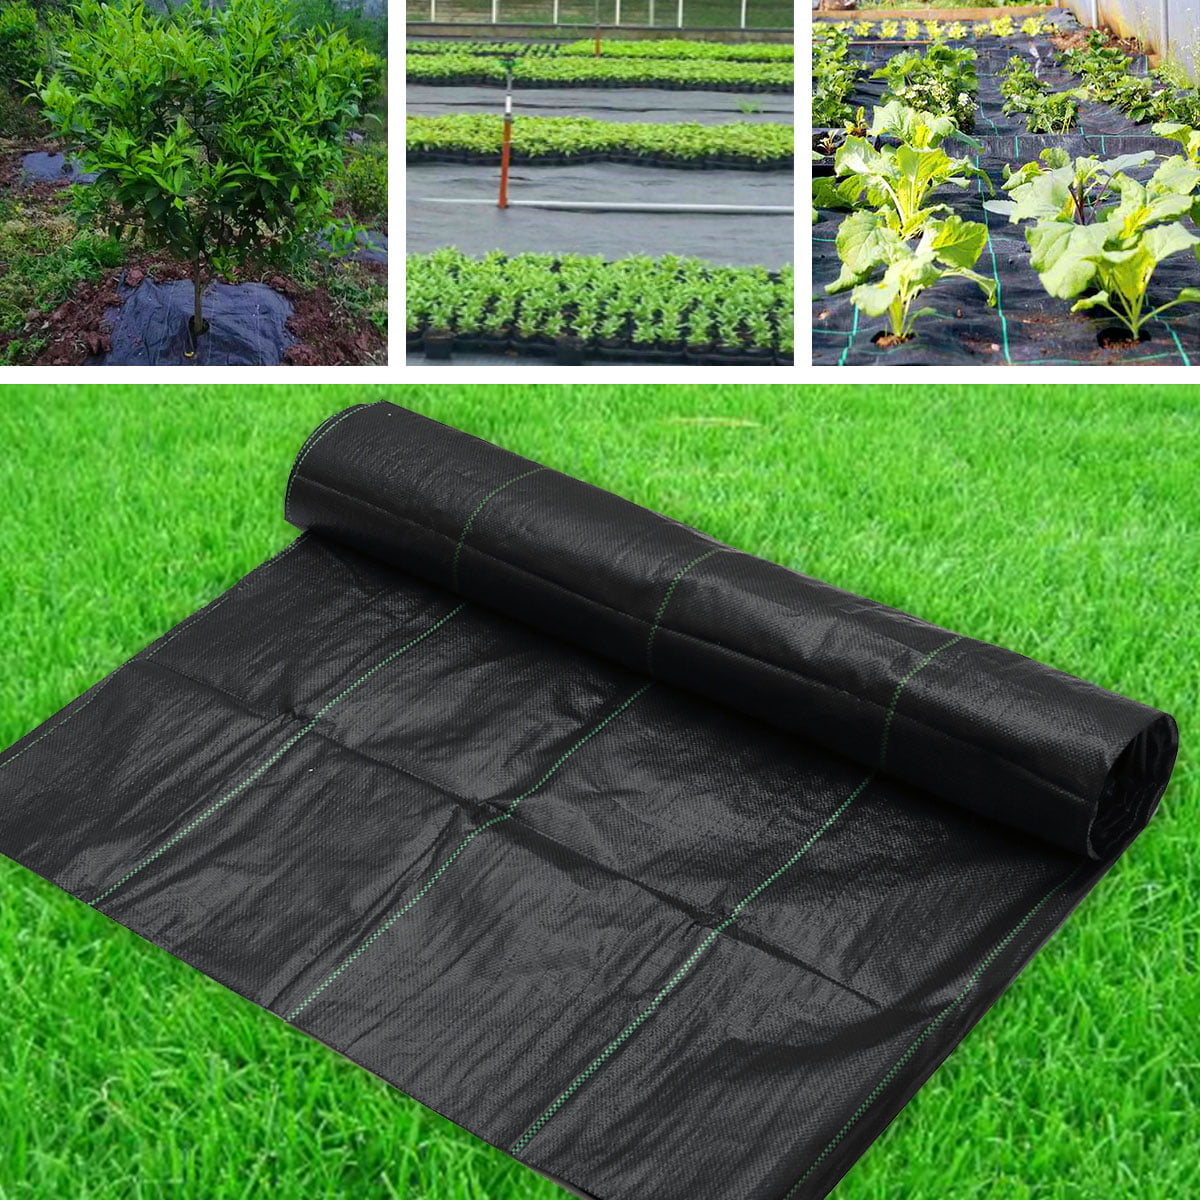 Landscape Lawn Fabric Ground Cover Weed Control Barrier Garden 3 ft x 45 ft 